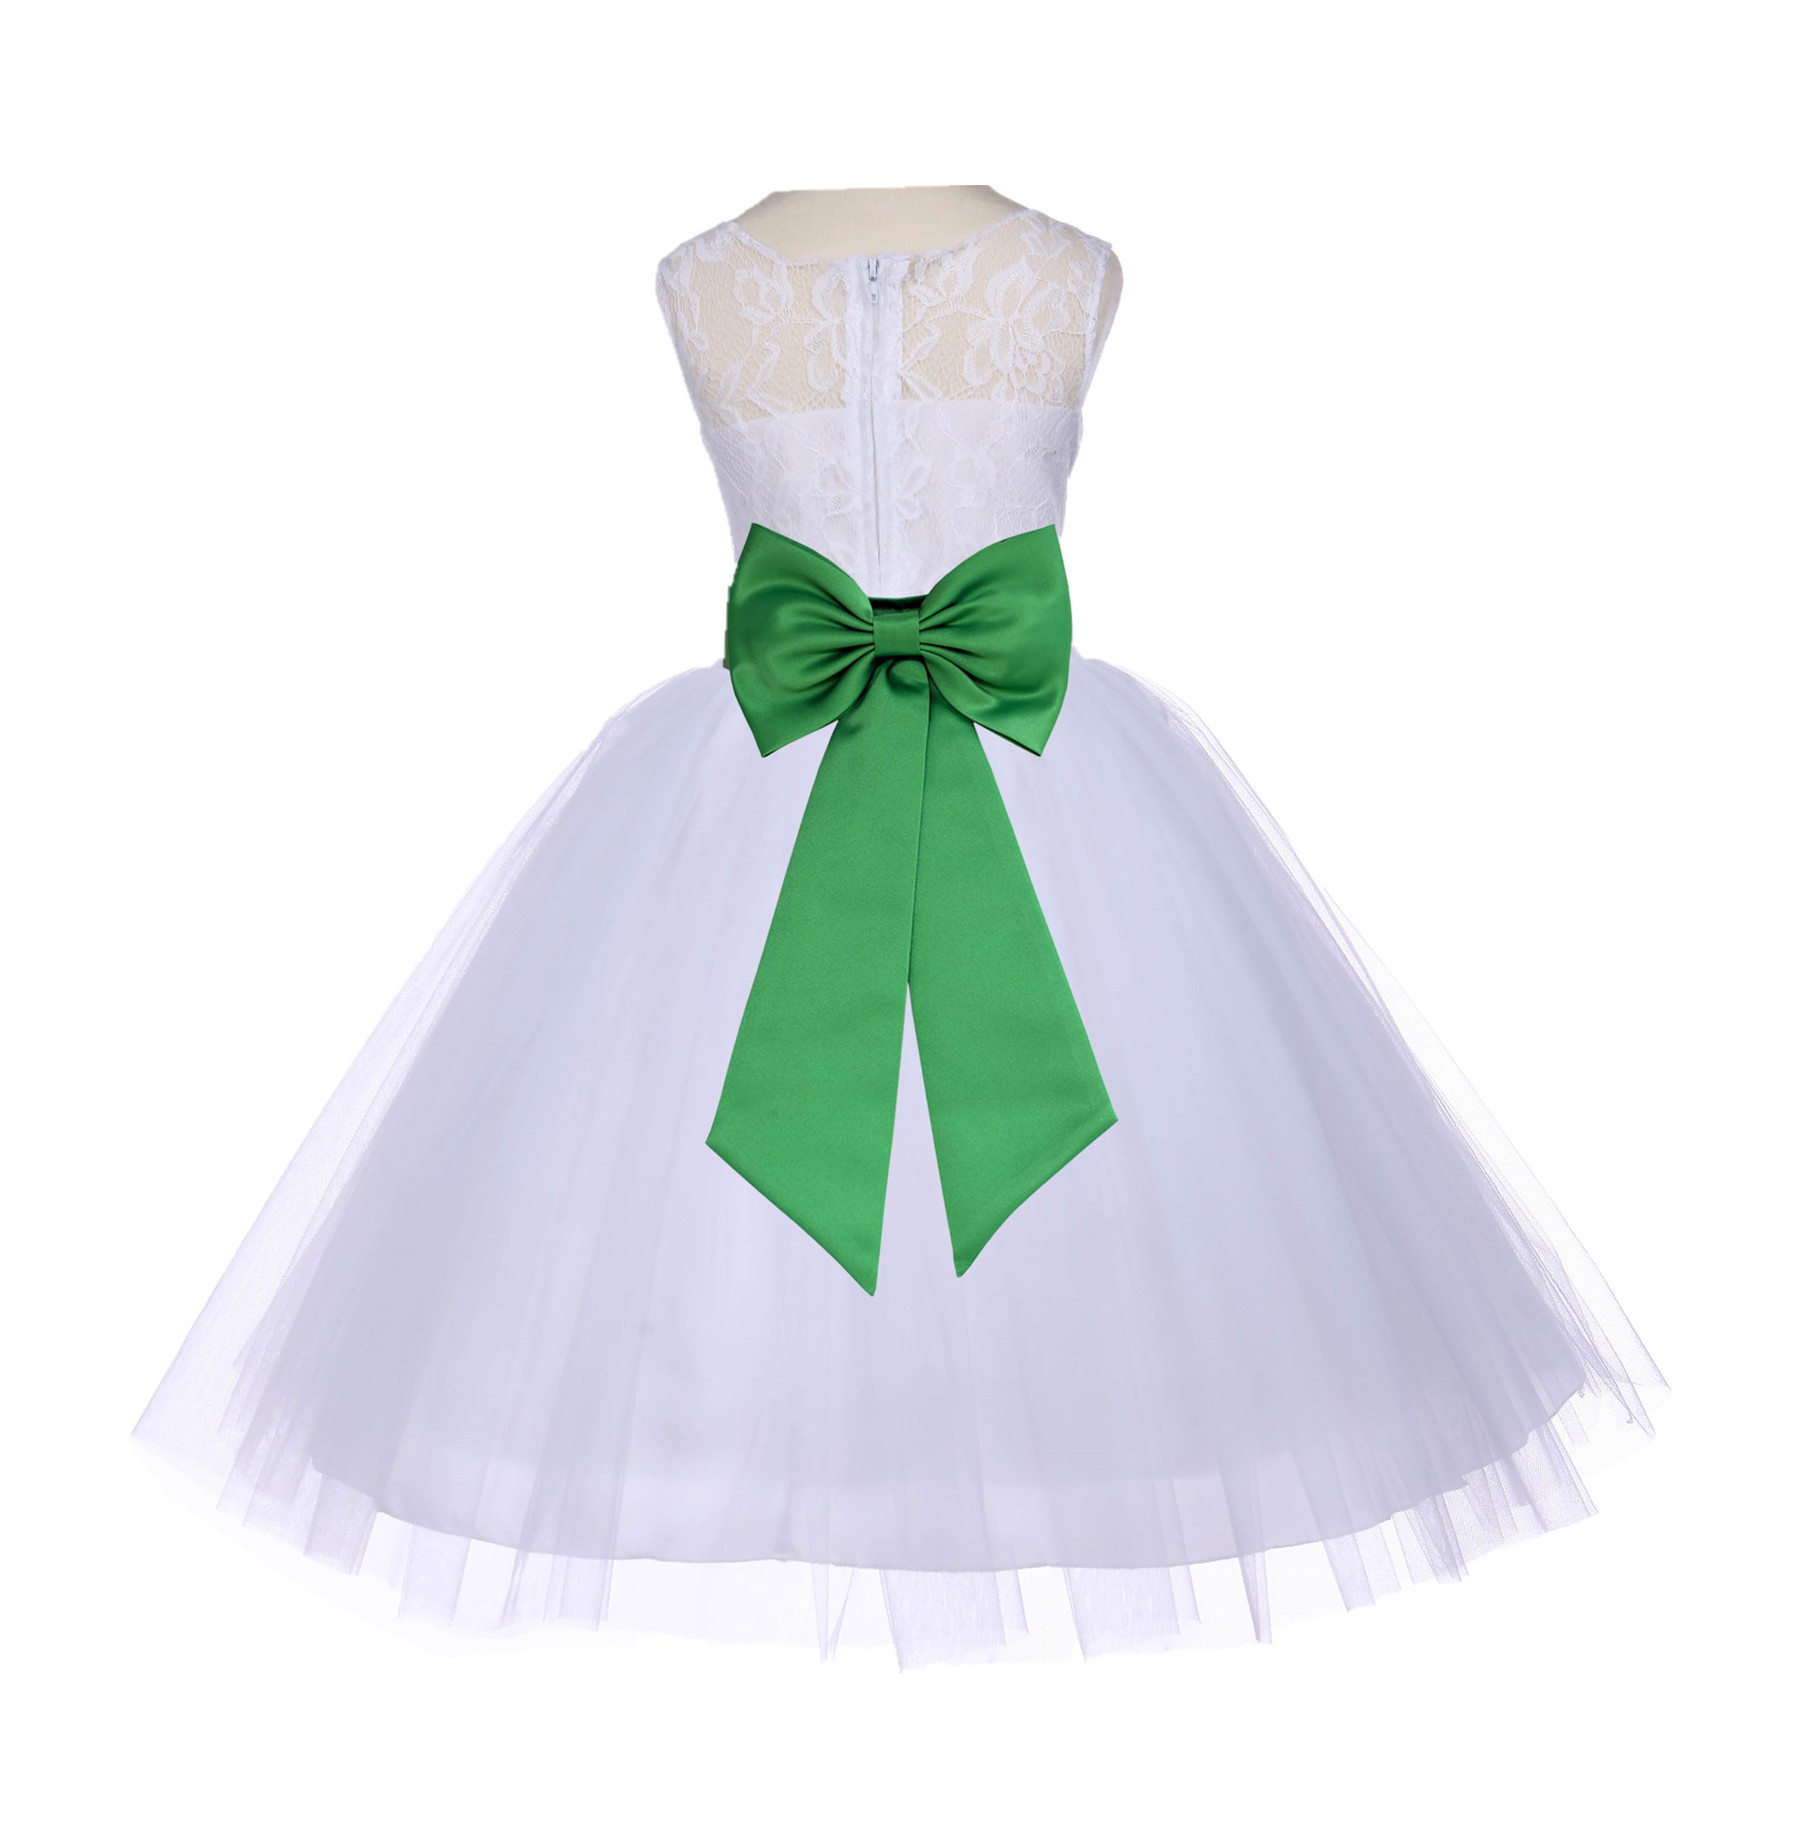 White/Lime Floral Lace Bodice Tulle Flower Girl Dress Wedding 153T